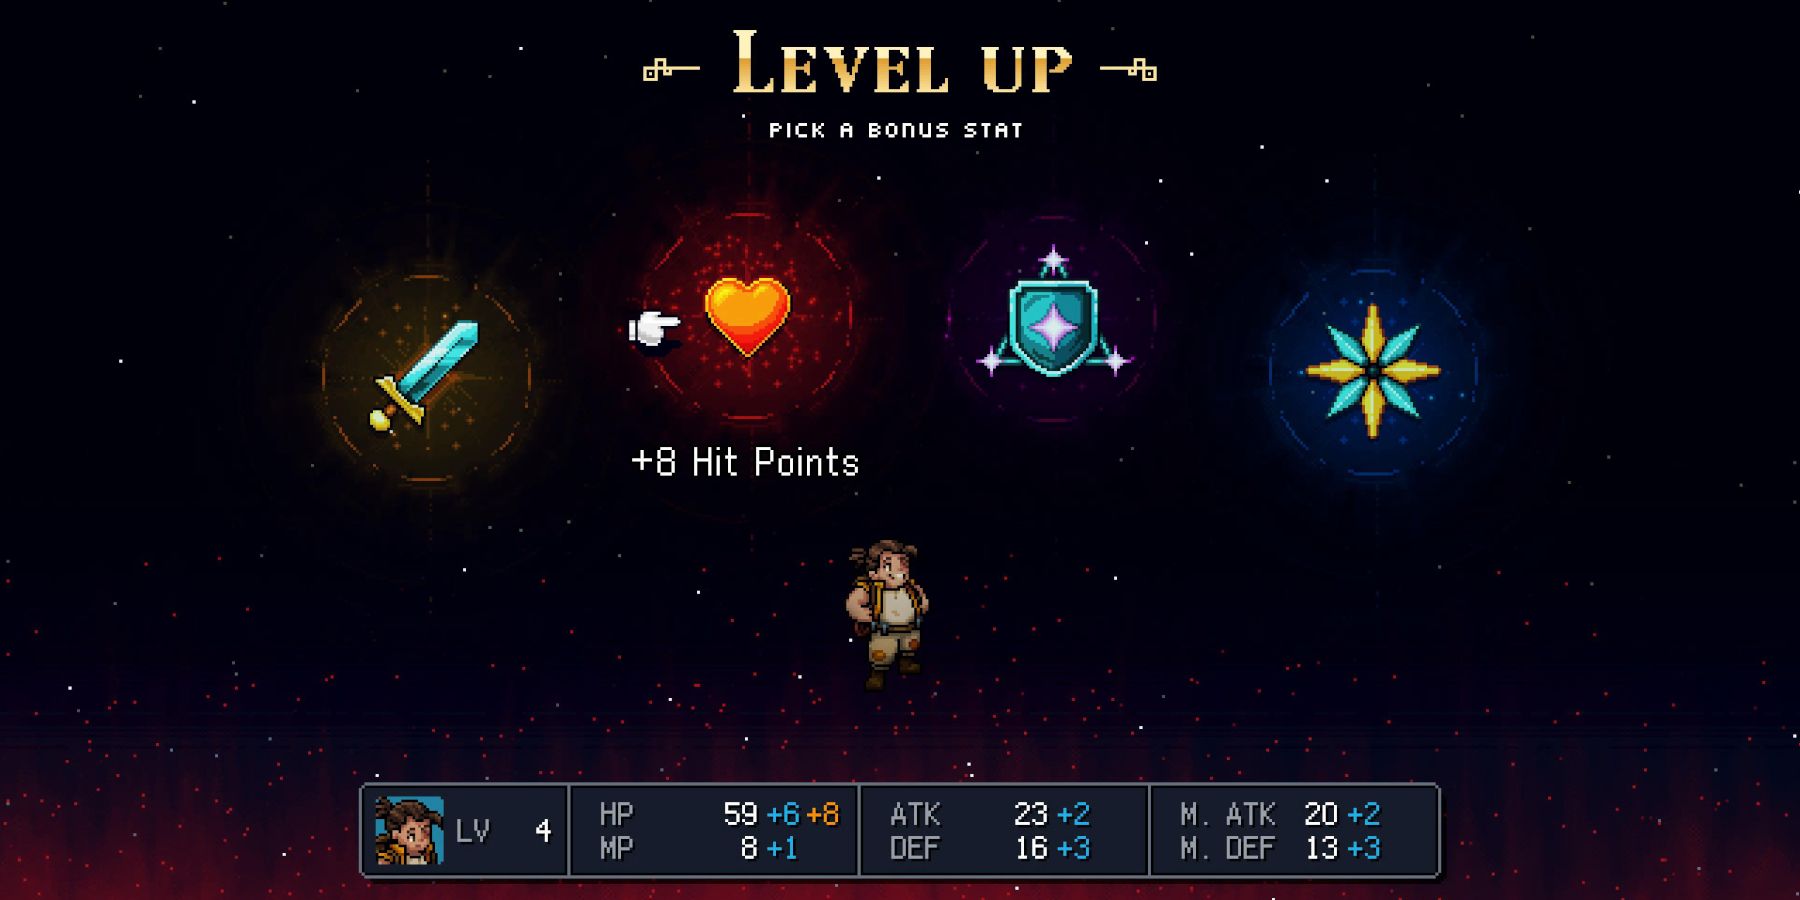 Sea of Stars Review: A commendable attempt at crafting a classic RPG